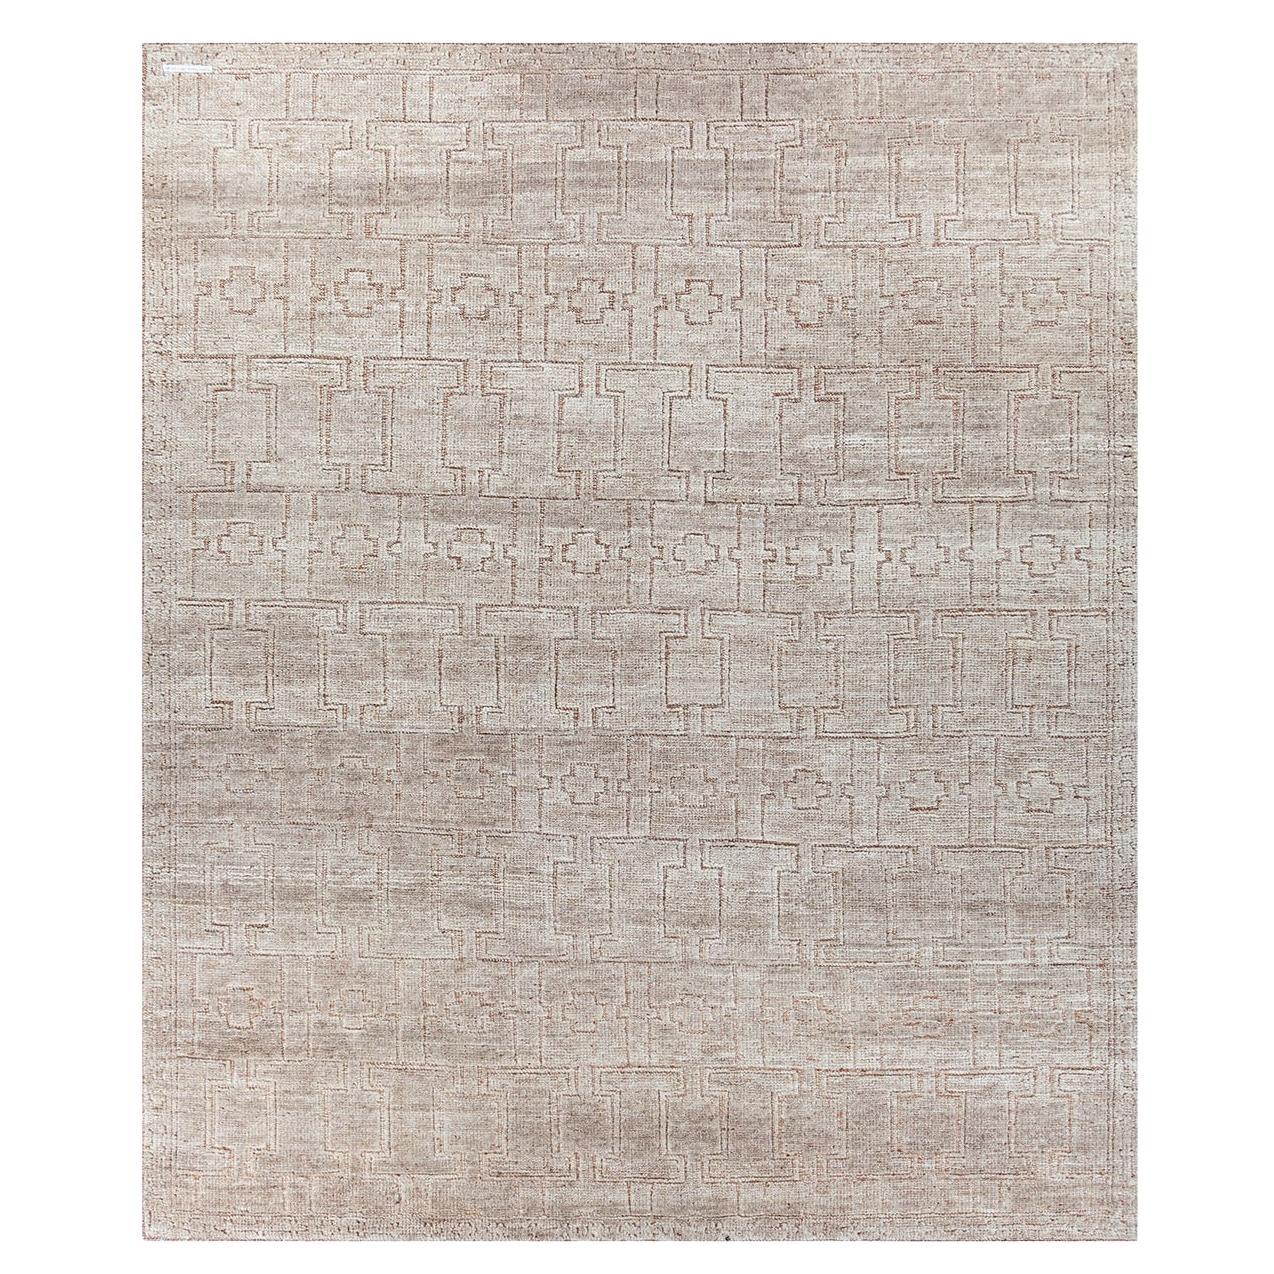  Mocha Rug by Rural Weavers, Knotted, Wool, 200x300cm For Sale